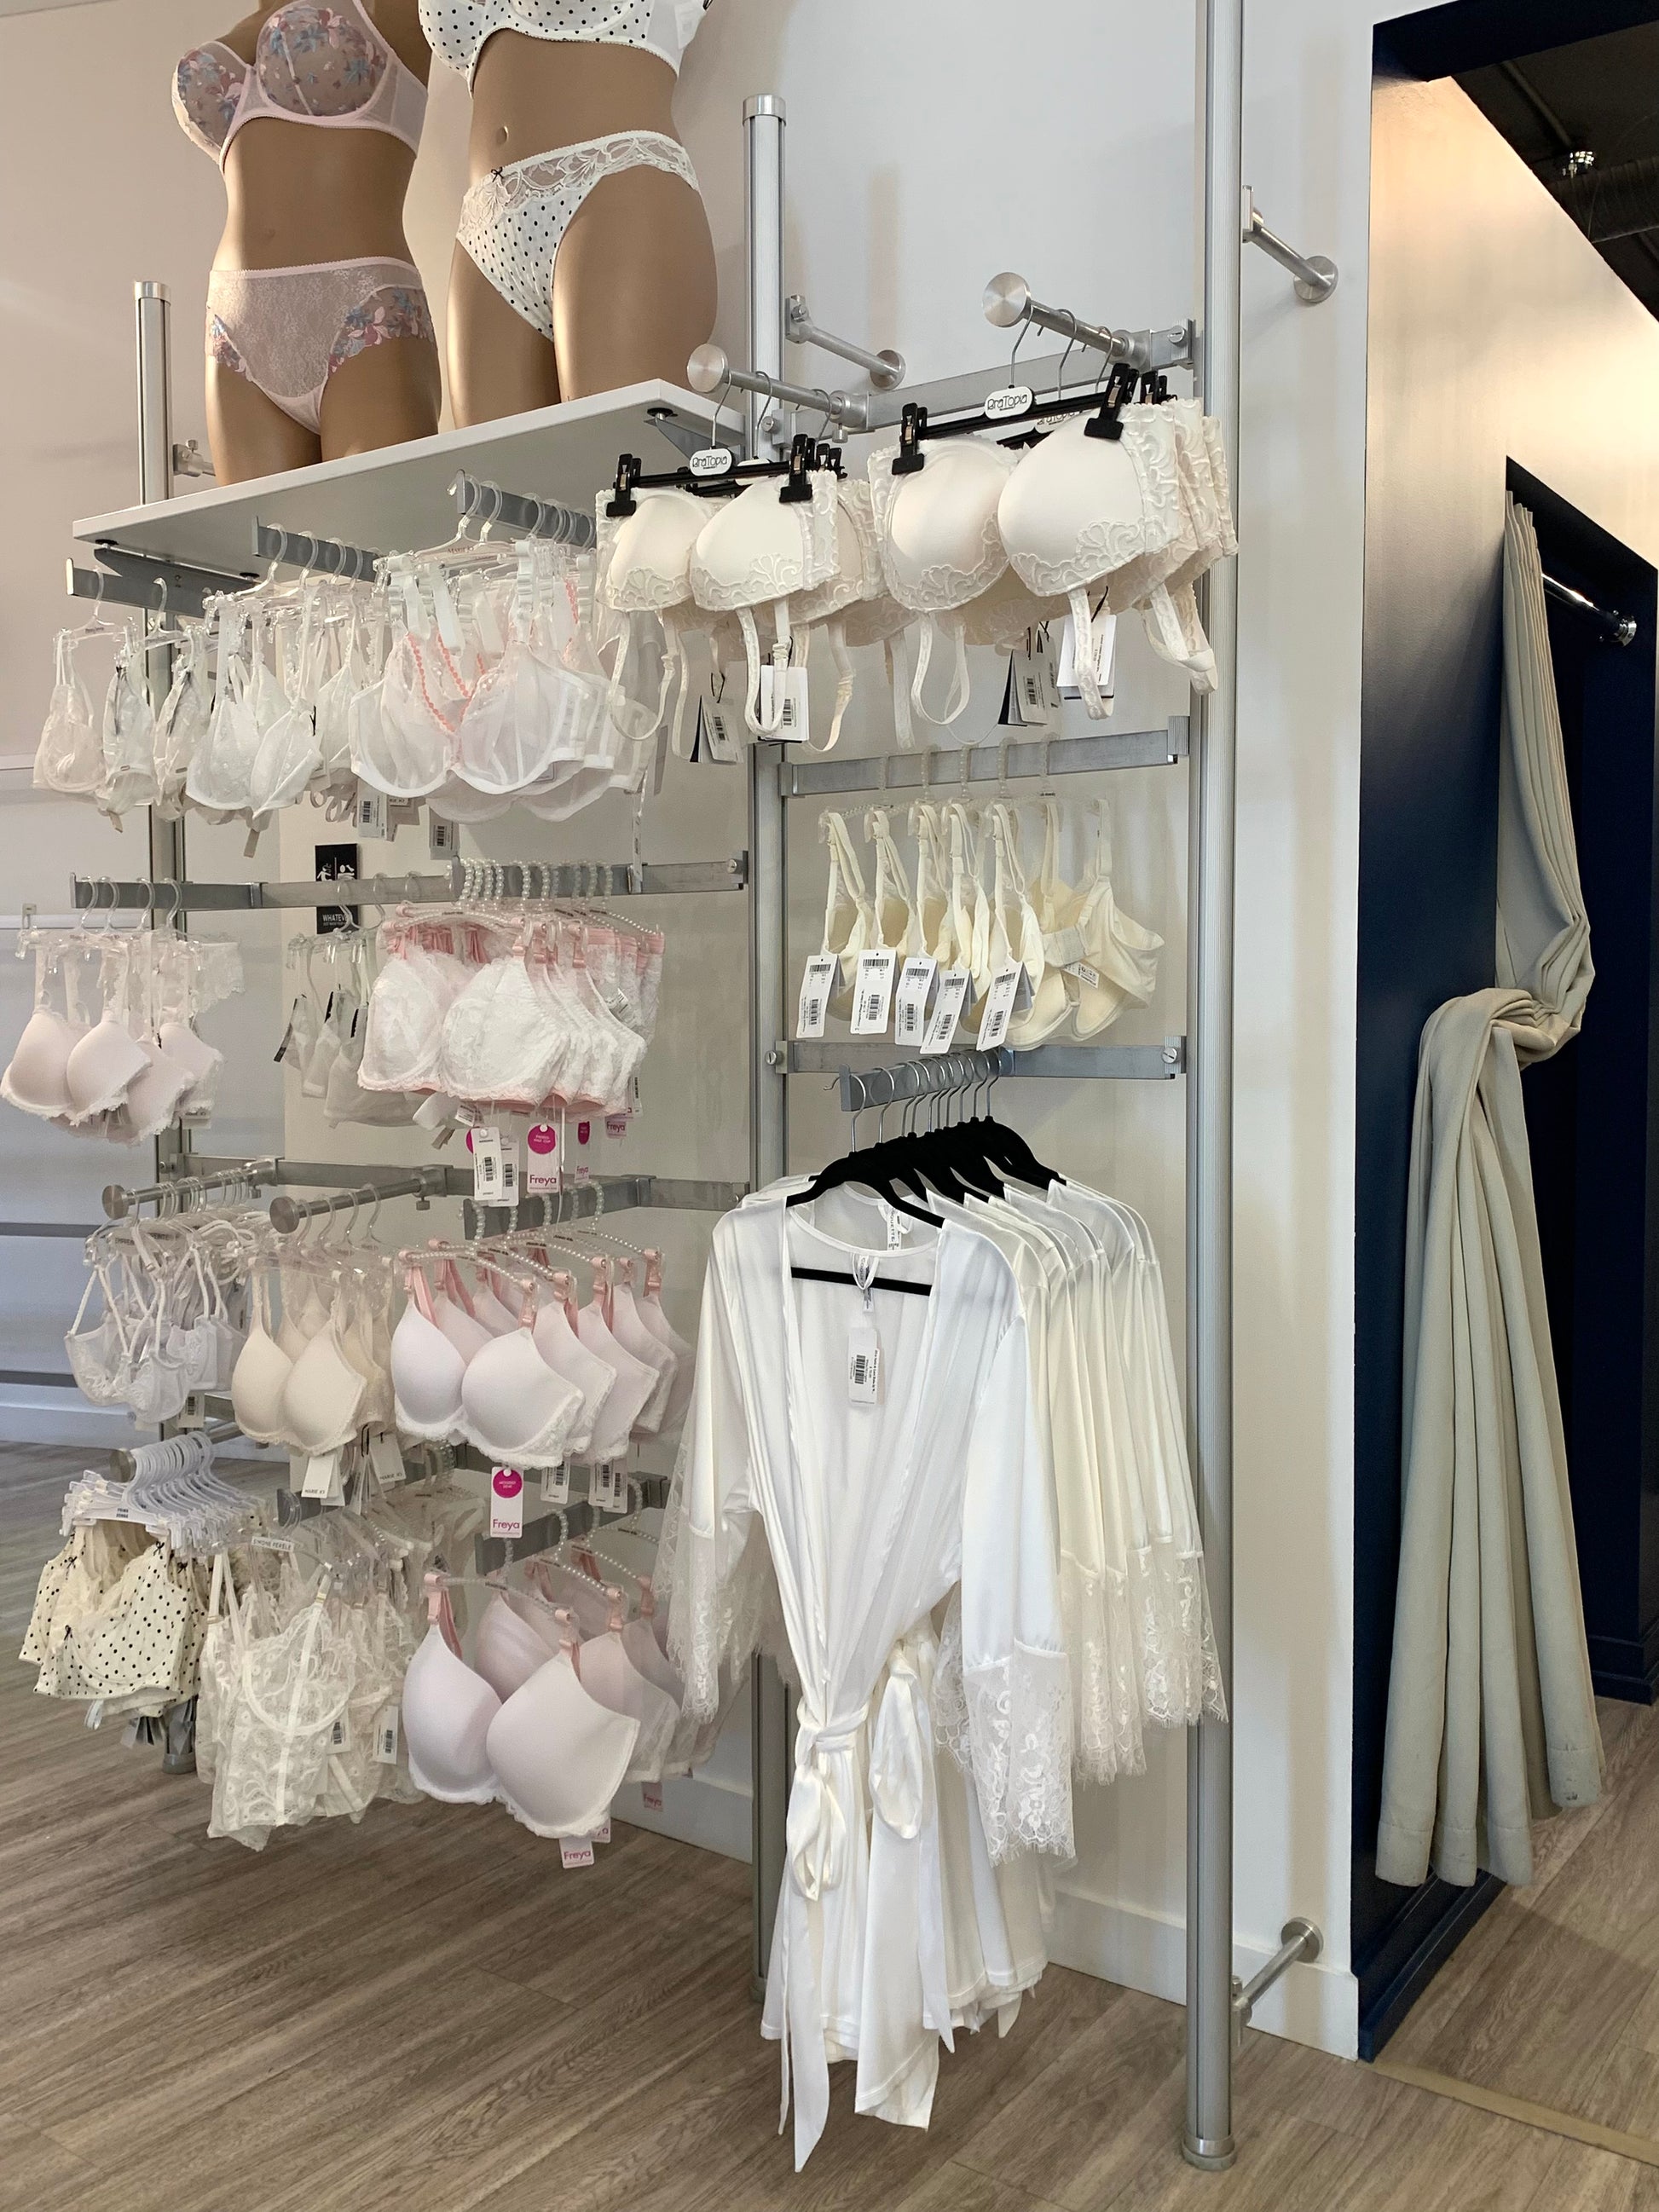 Here's How To Store Bras In Your Closet - ParfaitLingerie.com - Blog